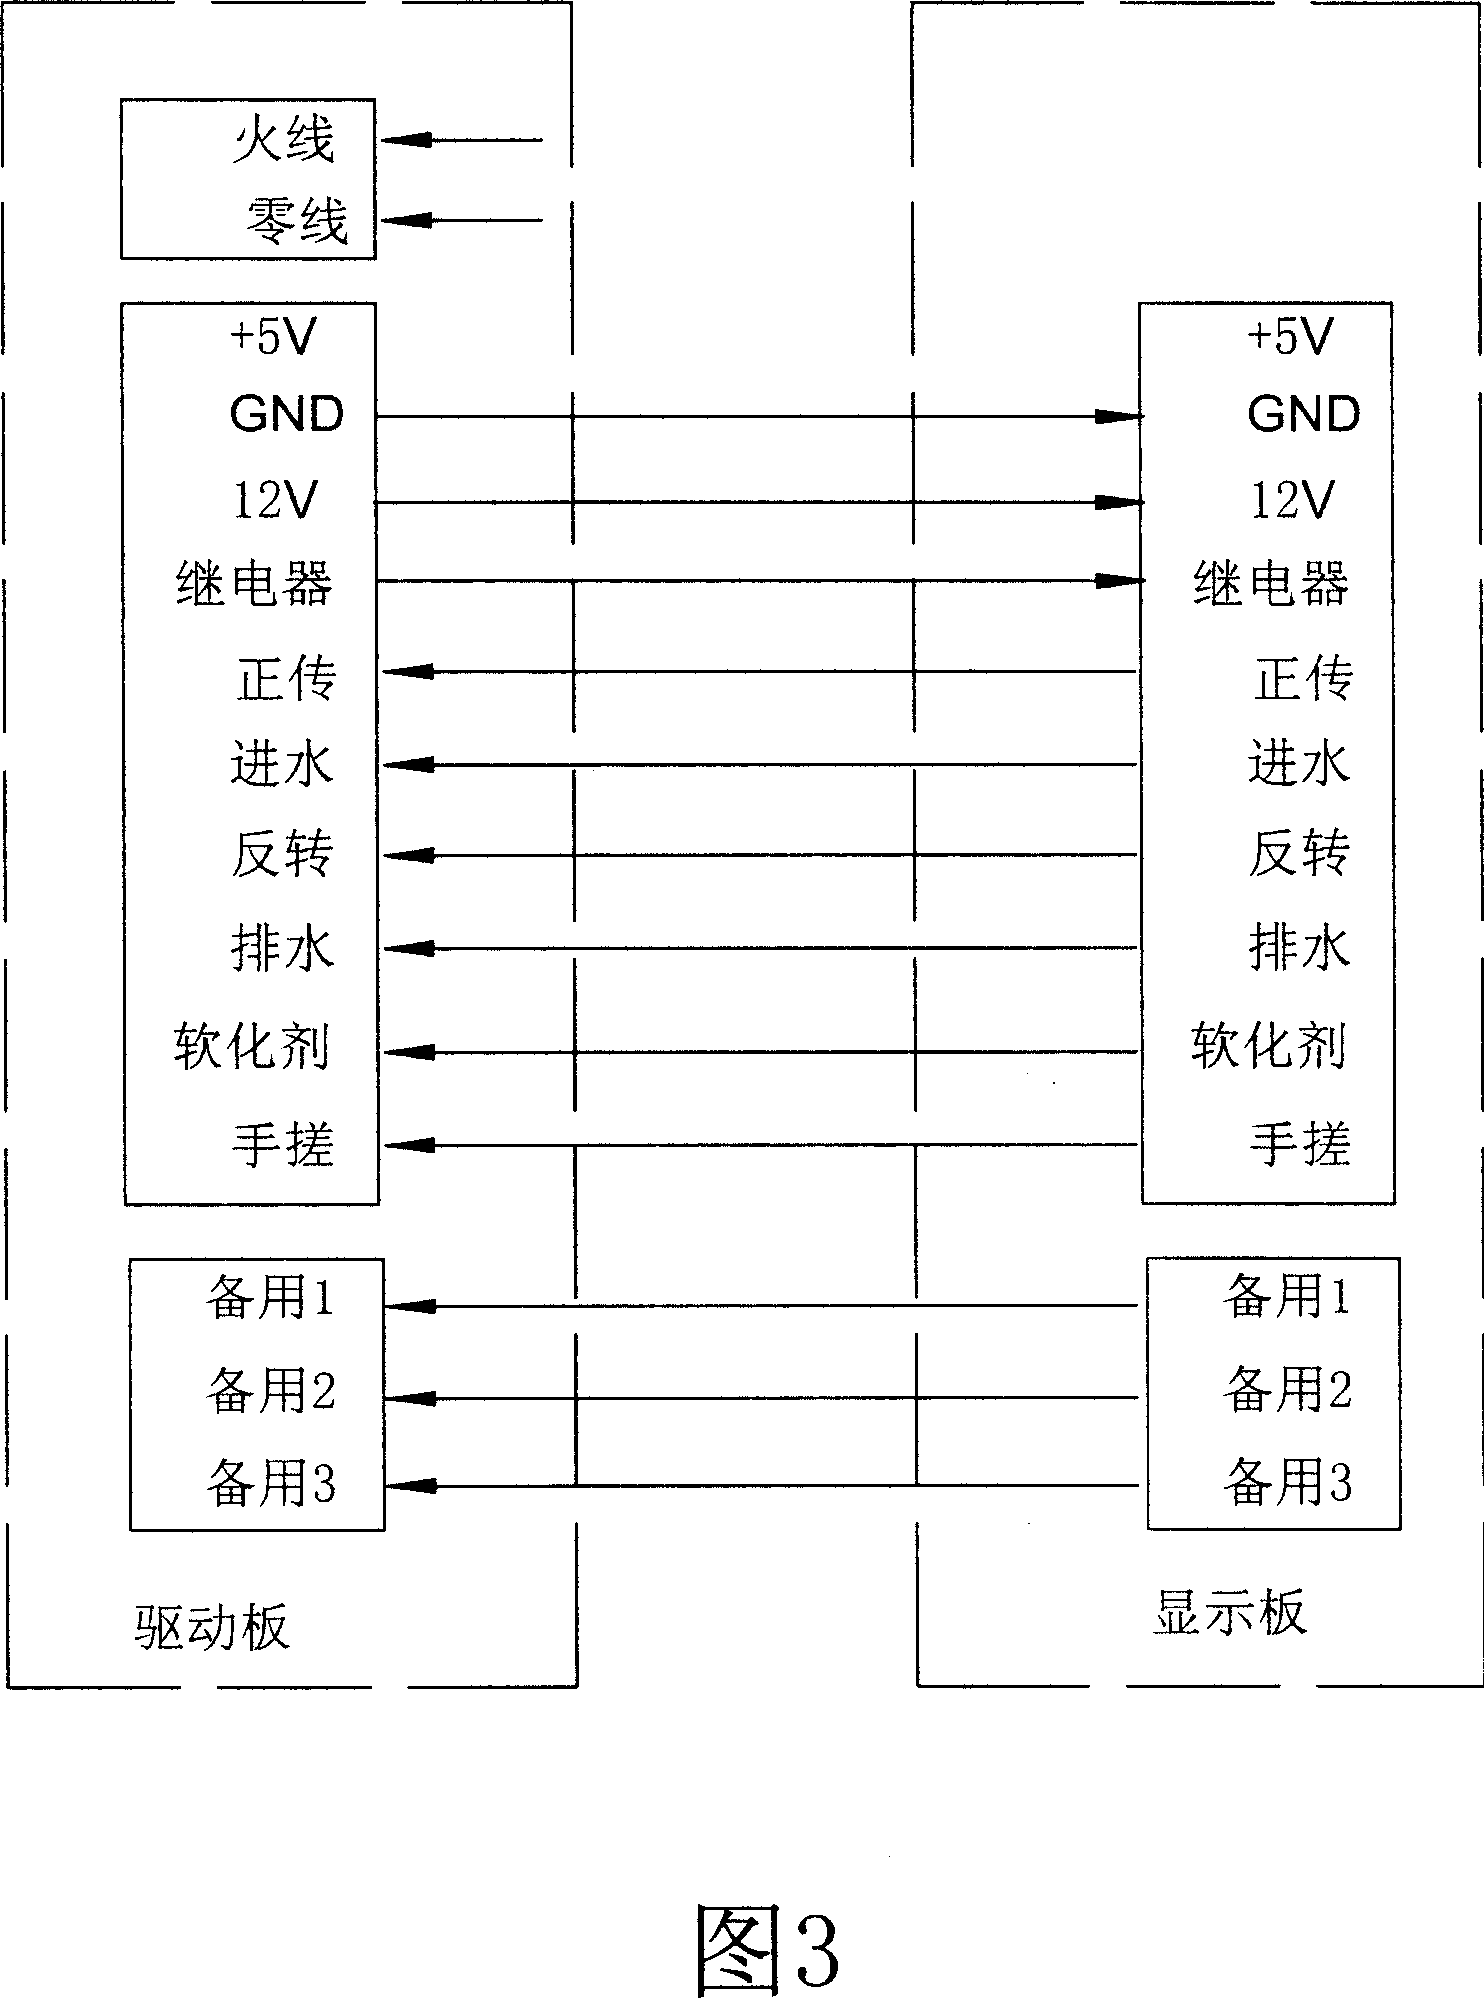 Washing machine computer control plate with double-plate structure